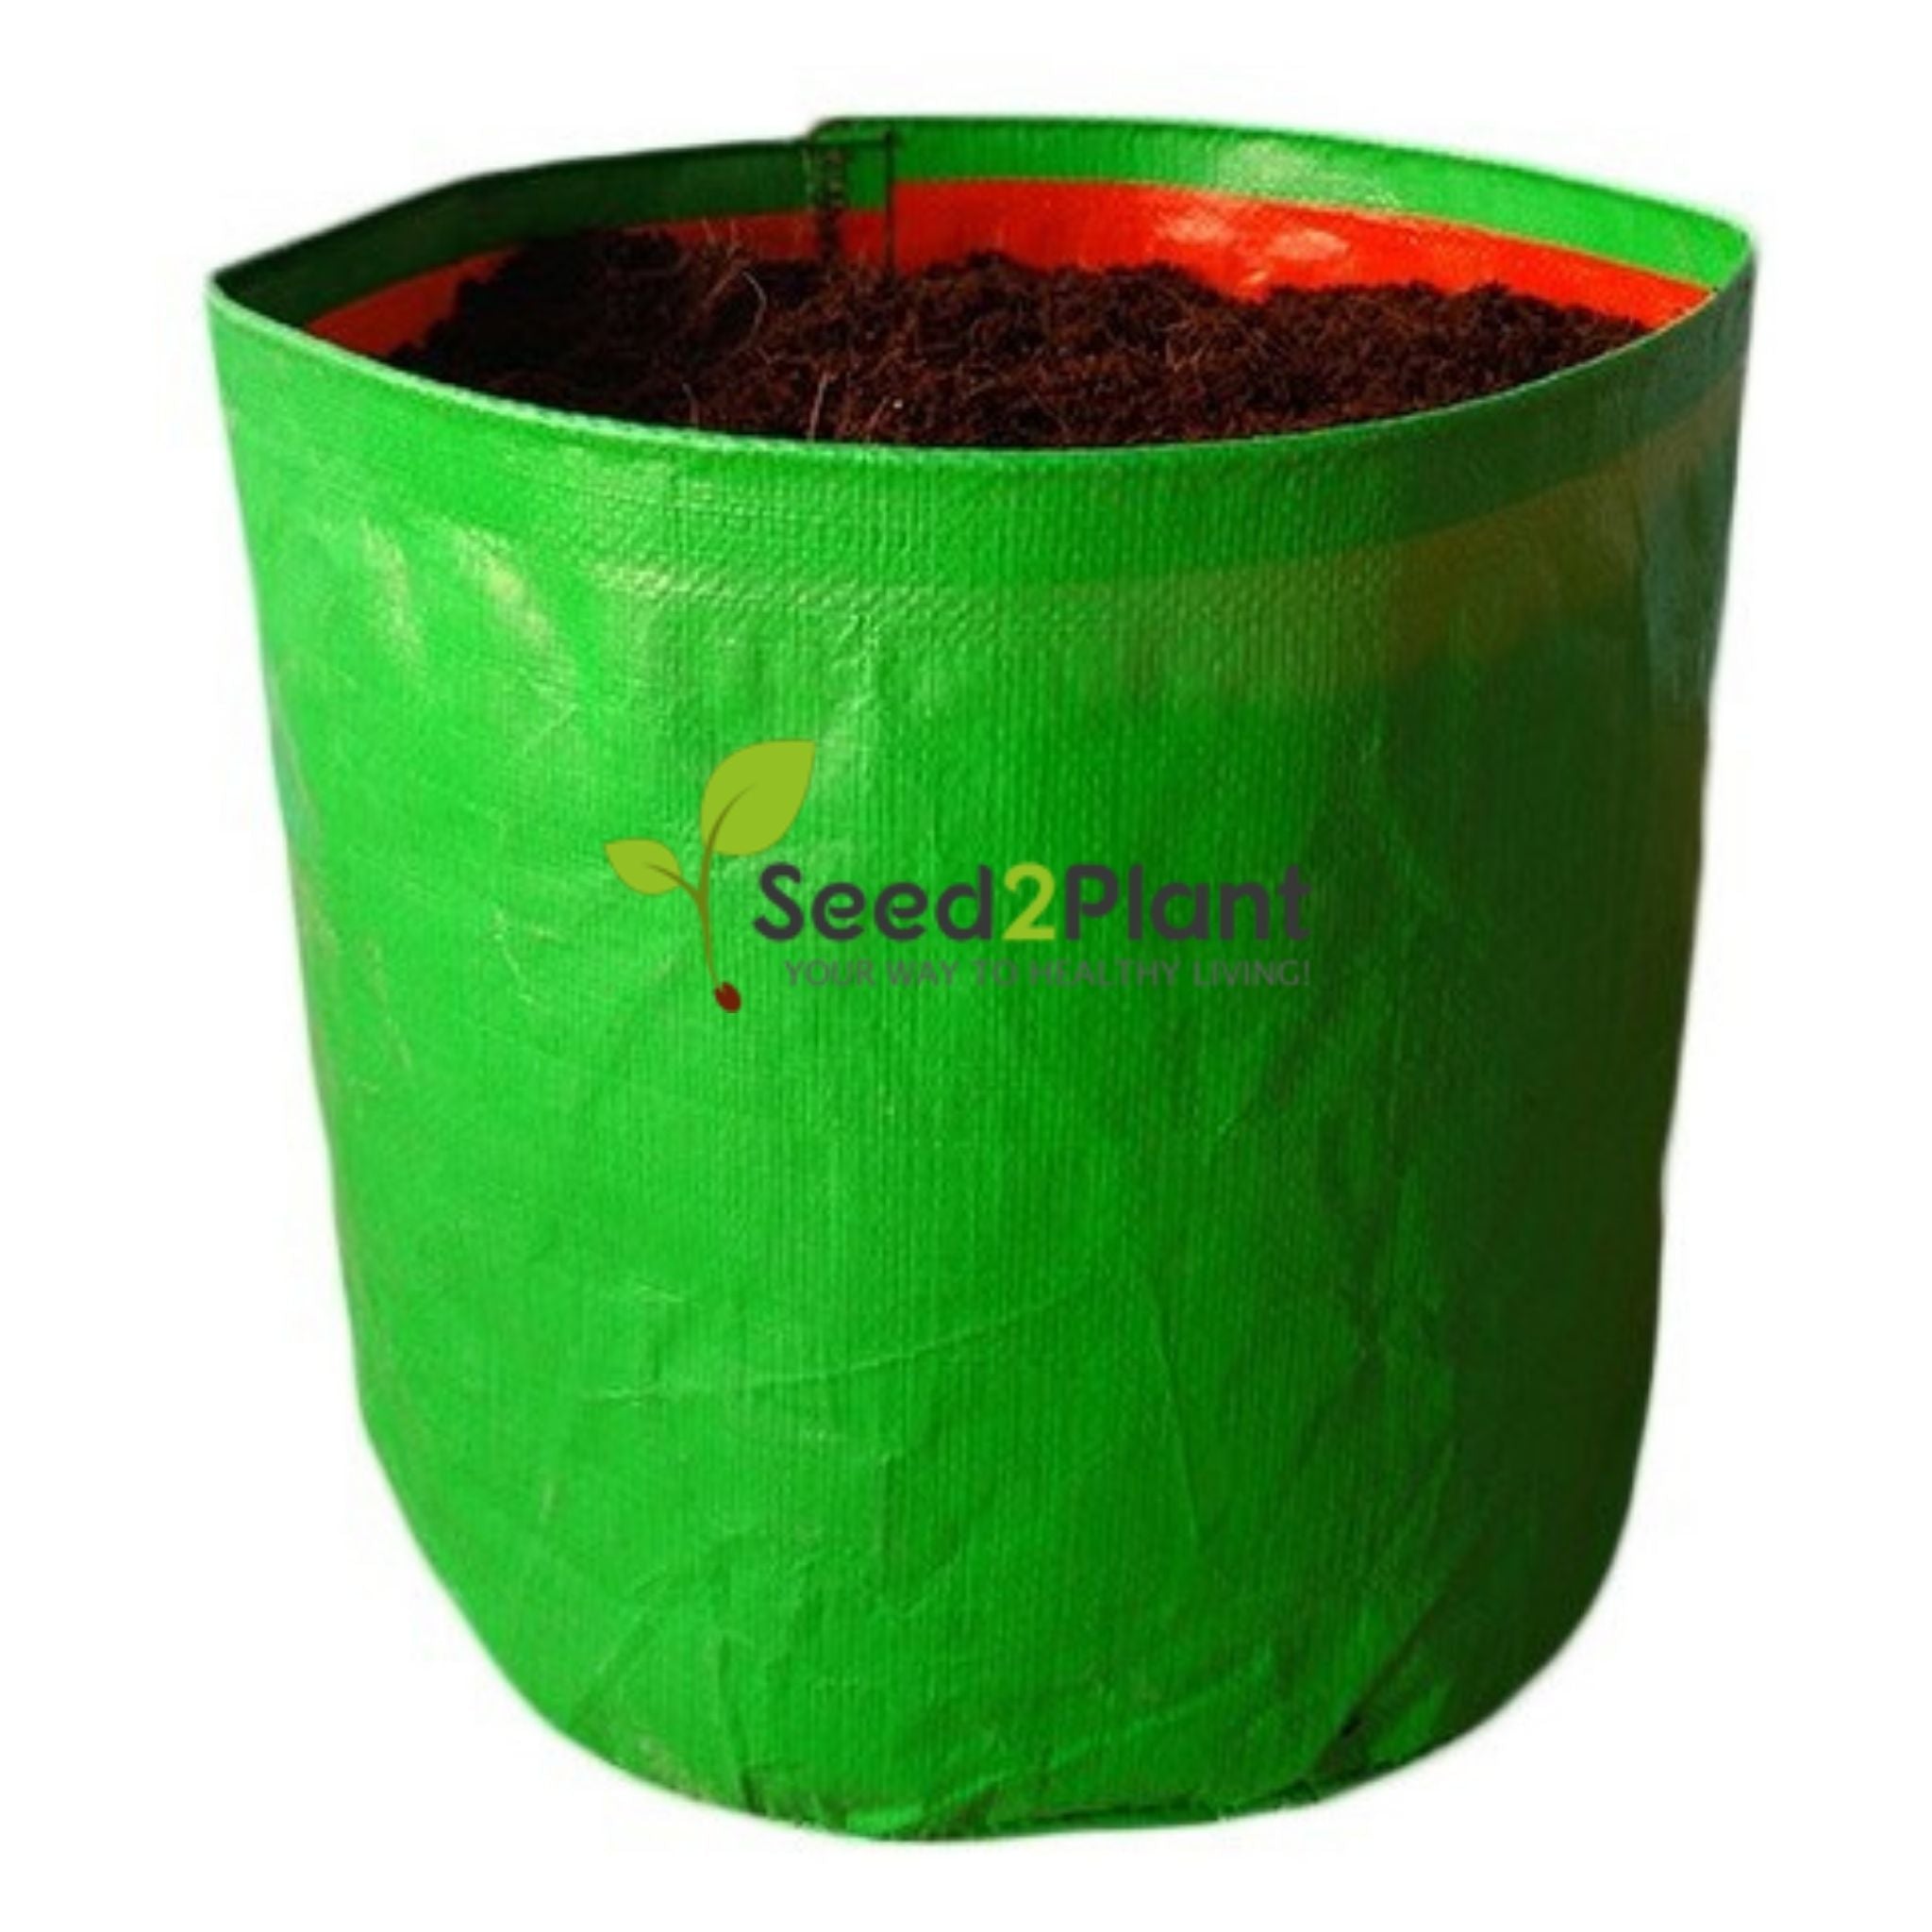 Wholesale Nursery Fabric Vegetable Grow Pots Felt Potato Planting Bag  Container With Side Flap Visible Window – Hebei Nuohui Trading Co., Ltd